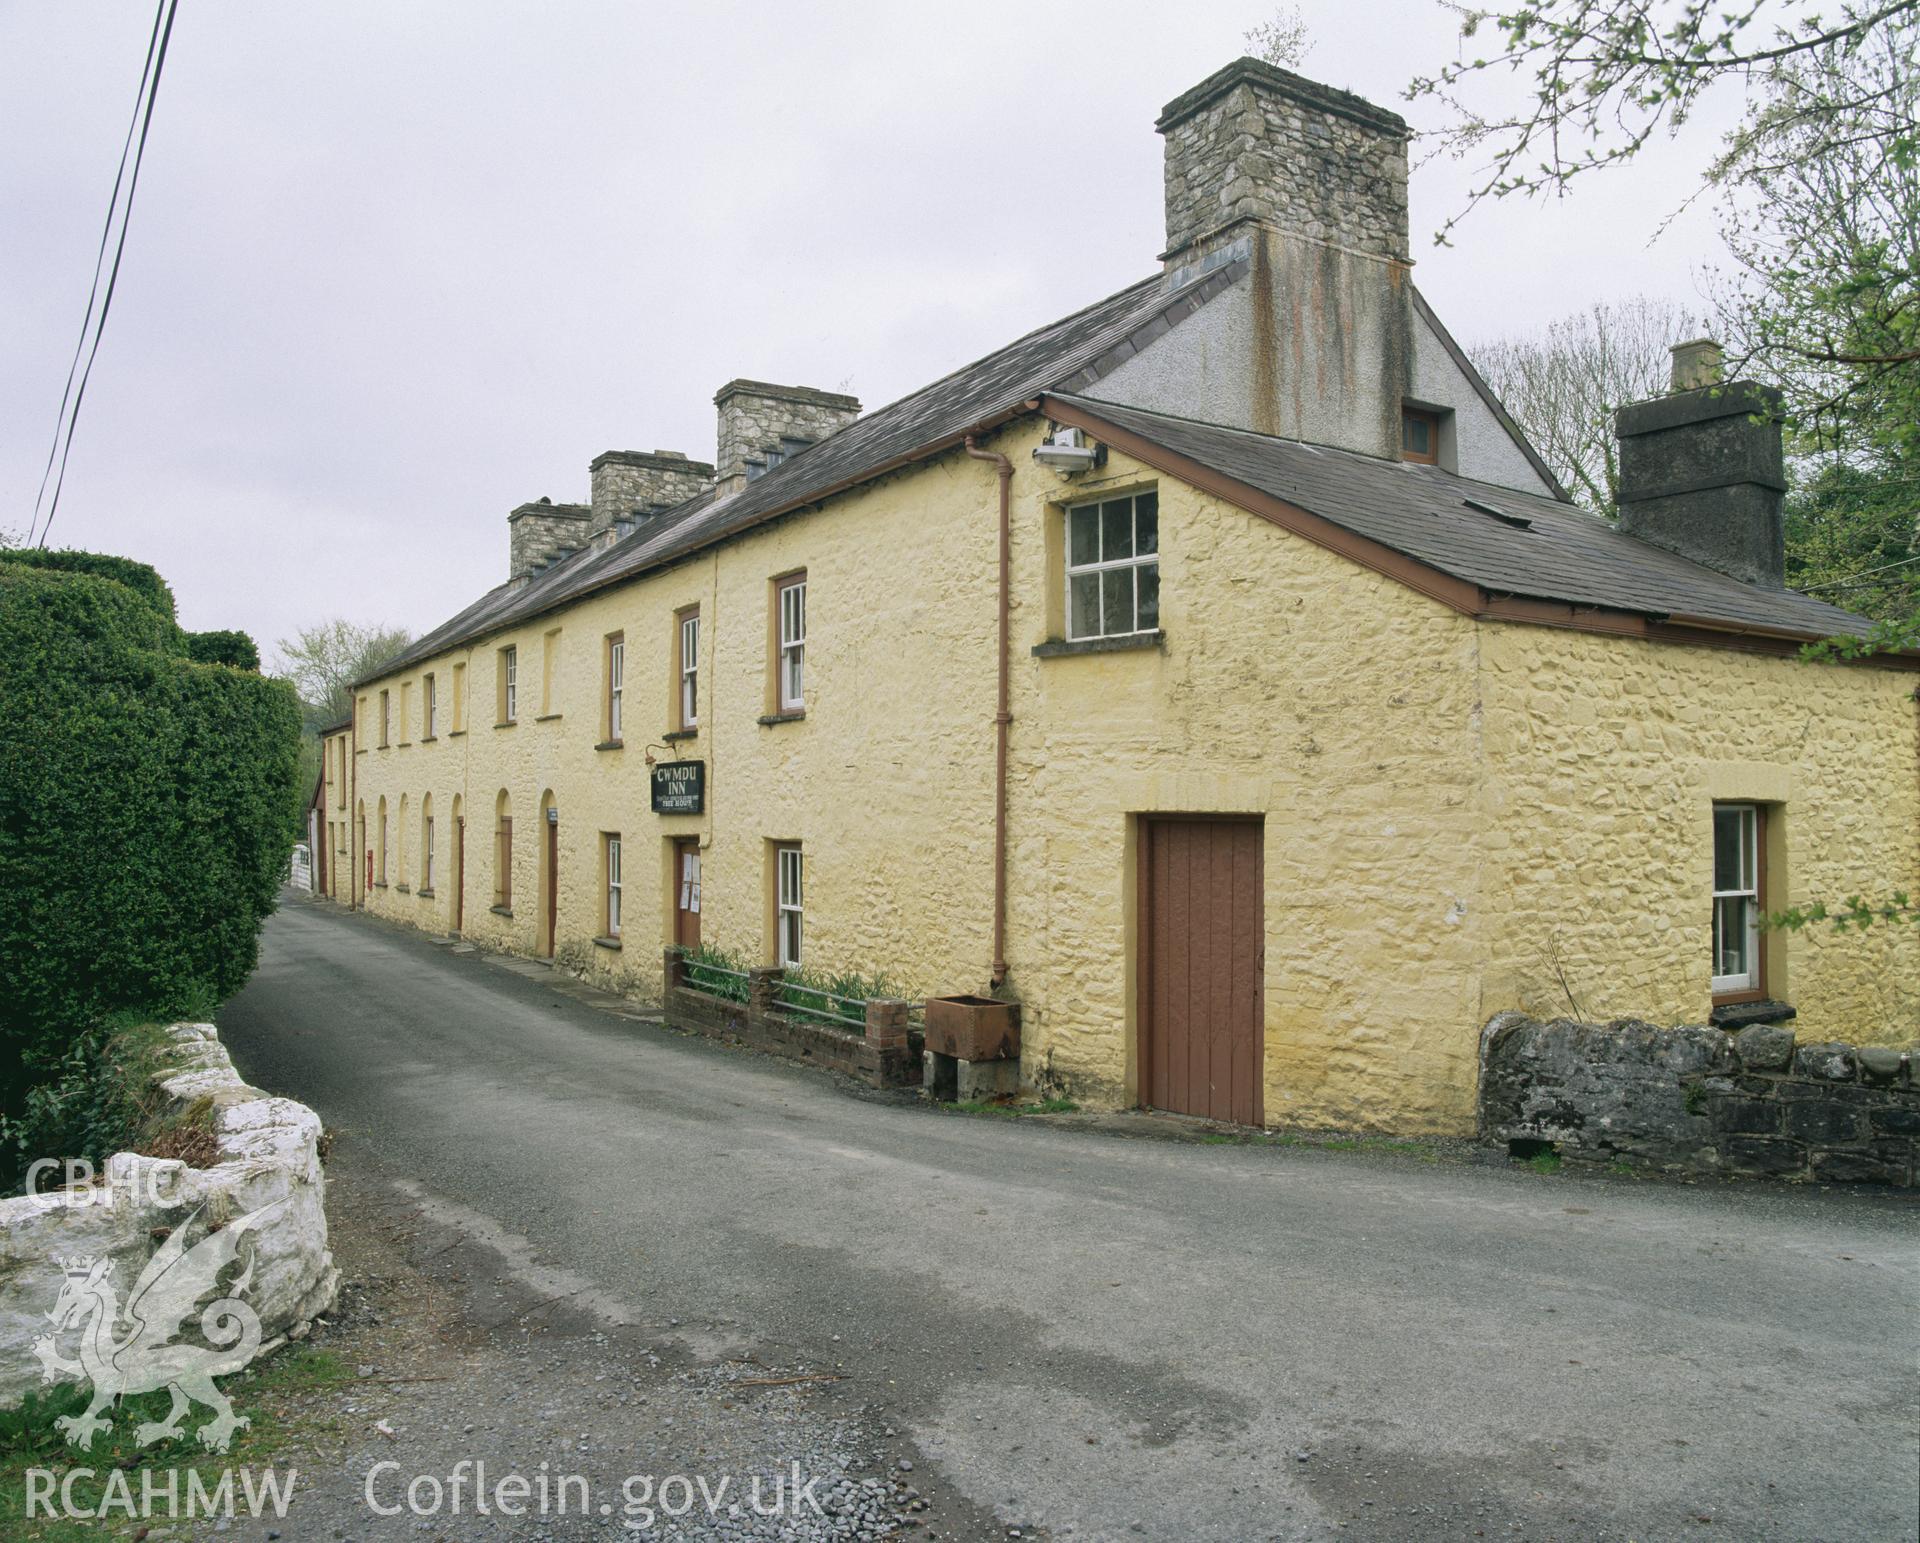 Colour transparency showing Village Row, Cwmdu, produced by Iain Wright, June 2004